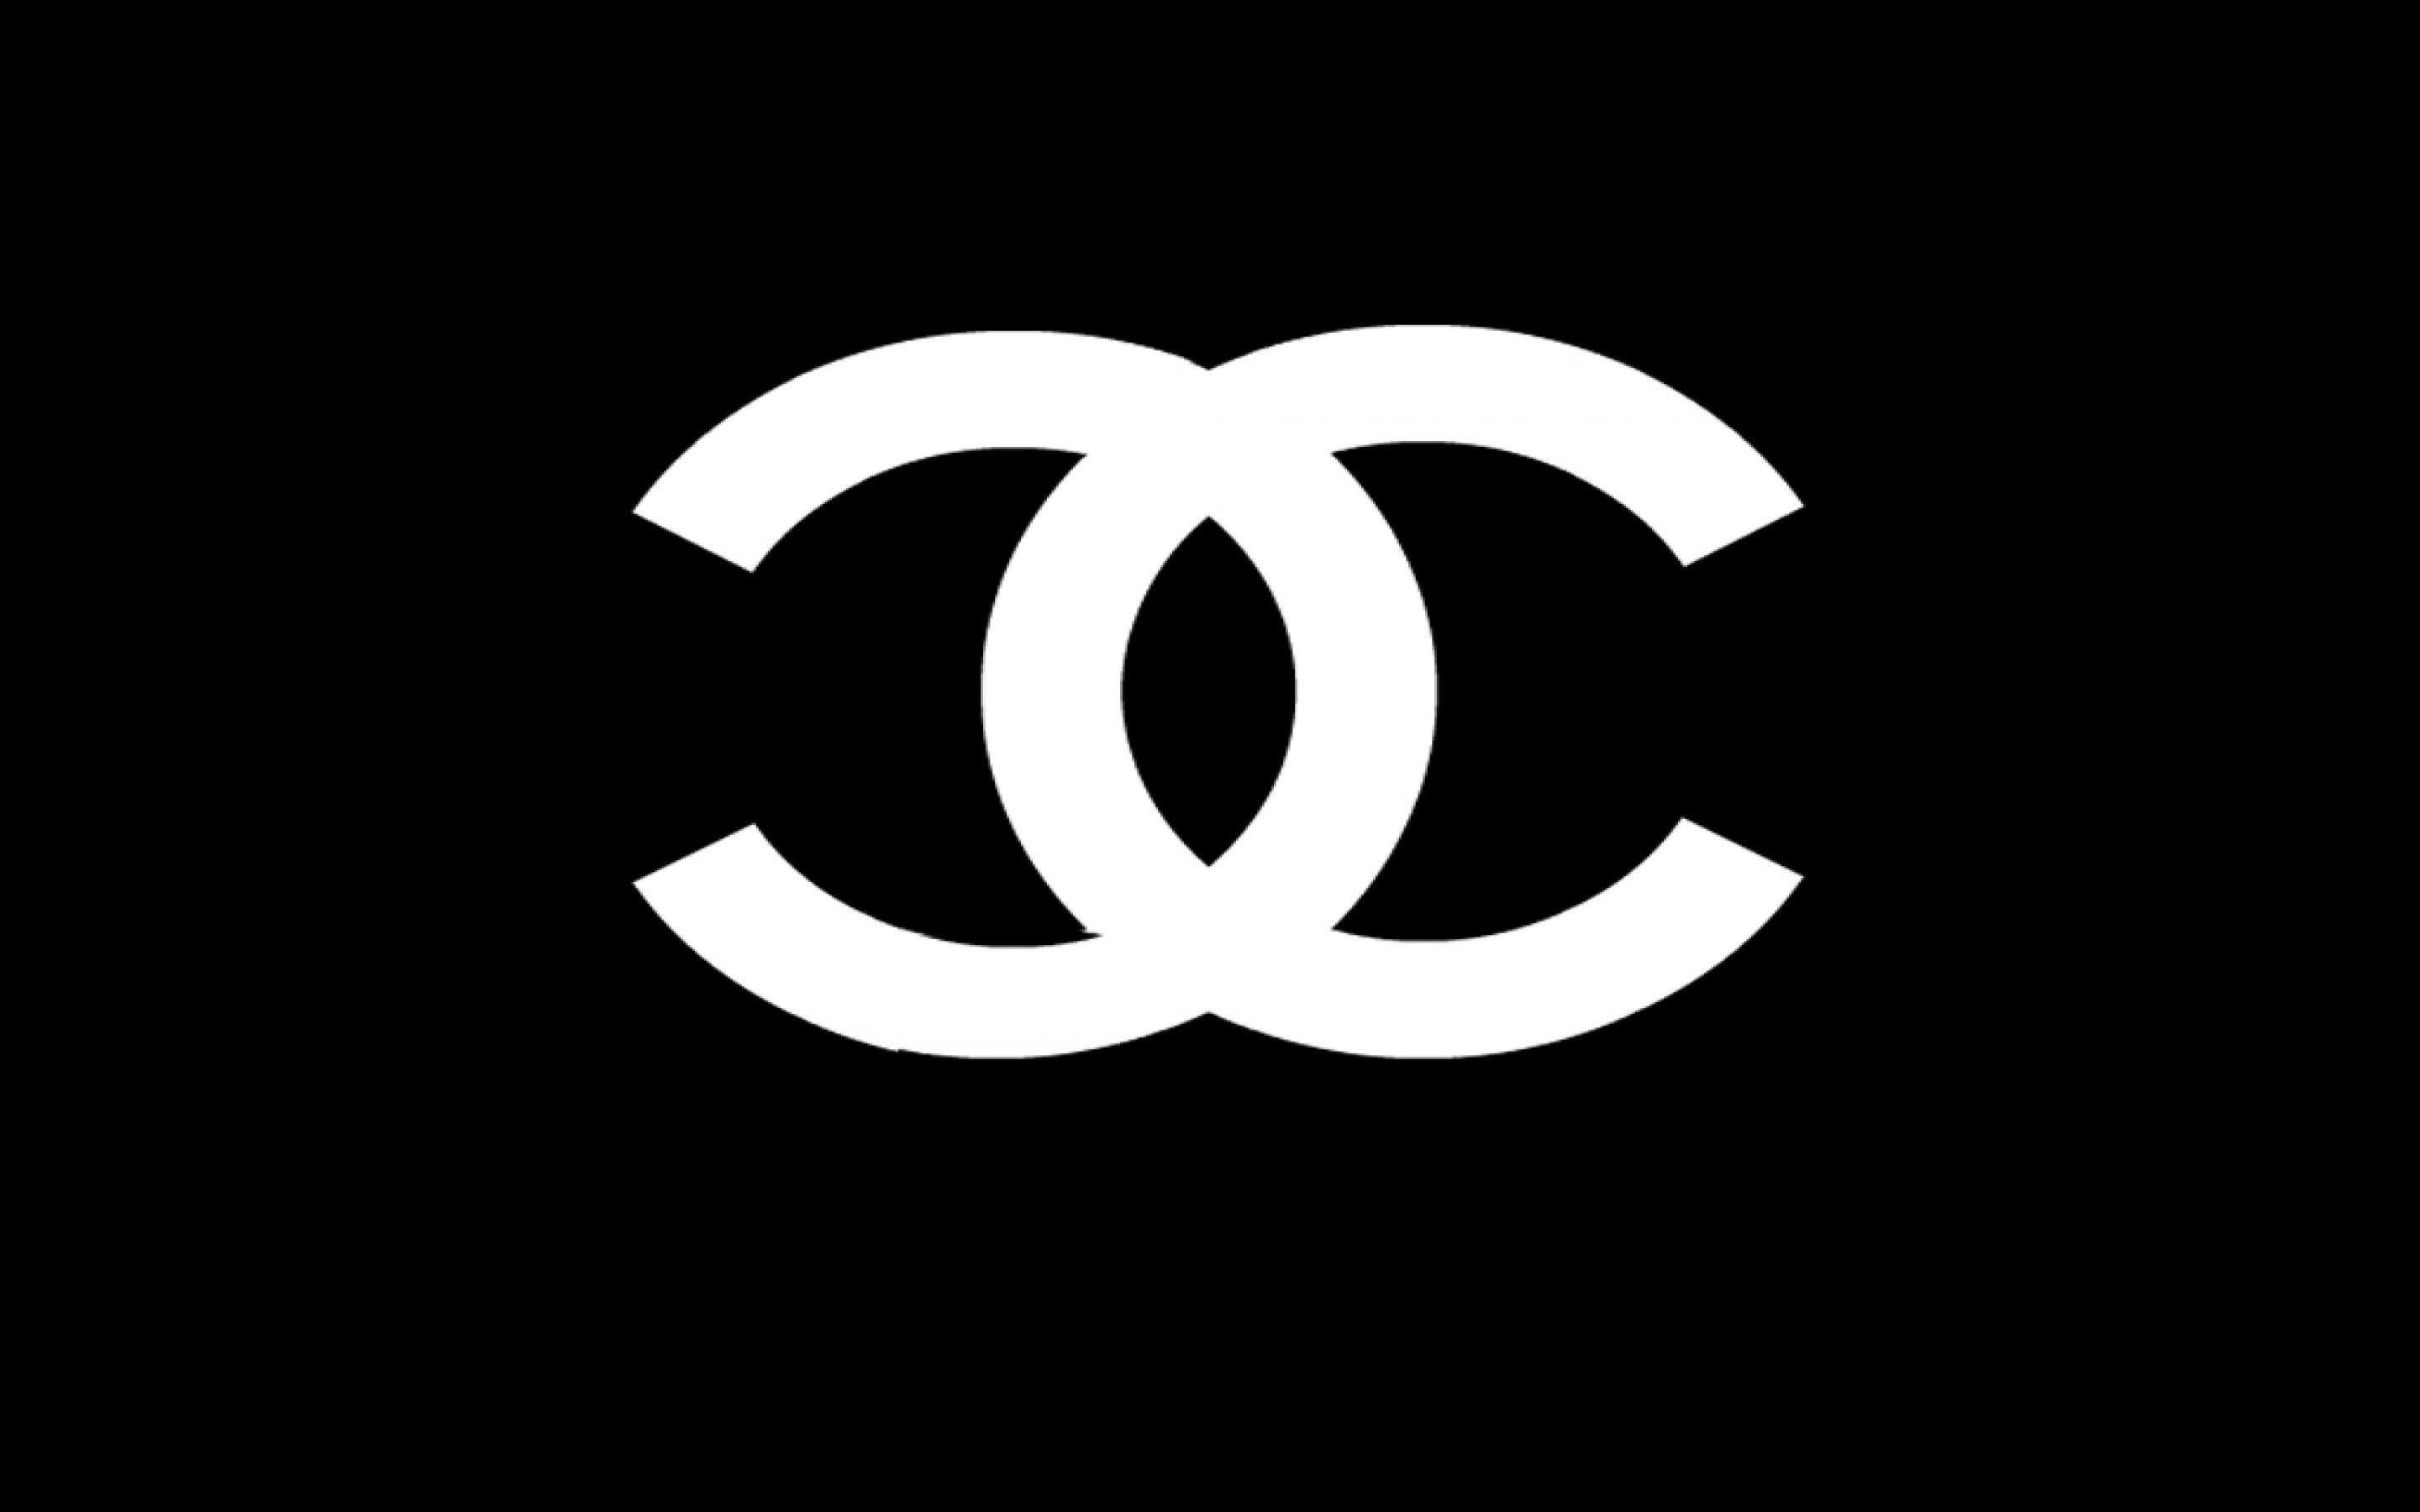 Download A Collage Of Chanel Logos And Other Images Wallpaper